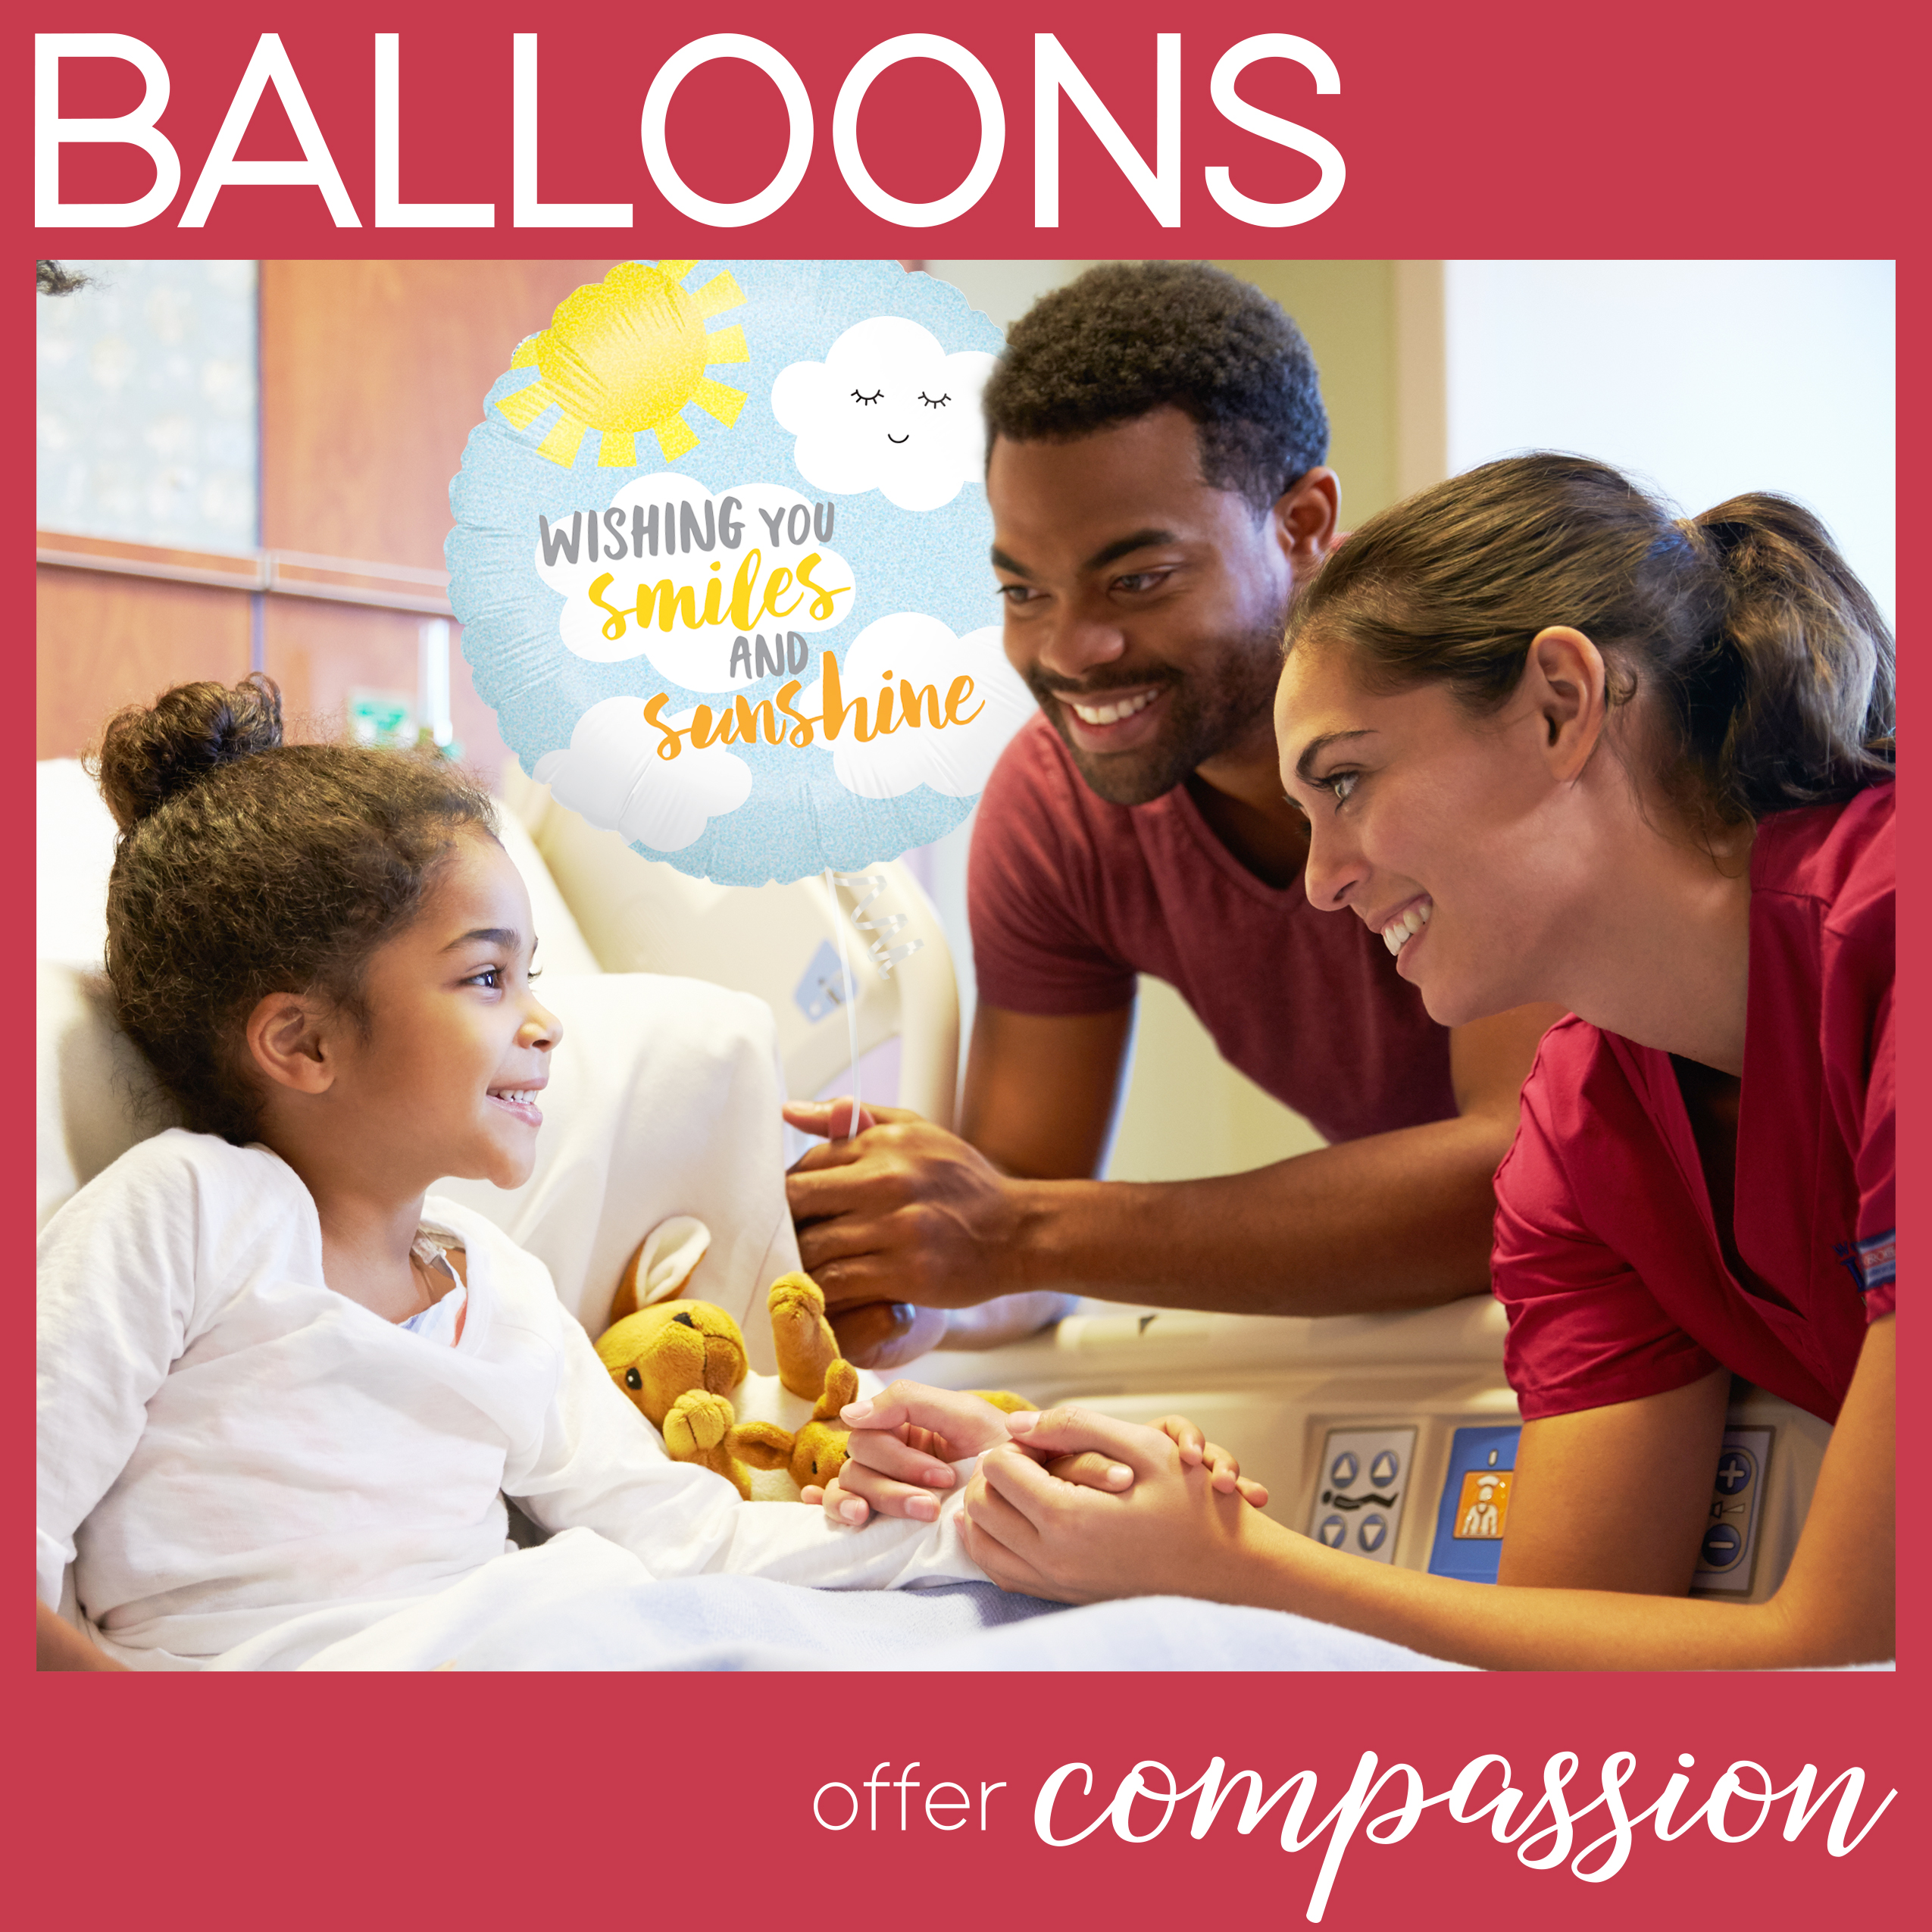 Balloon Facts - Balloons offer compassion